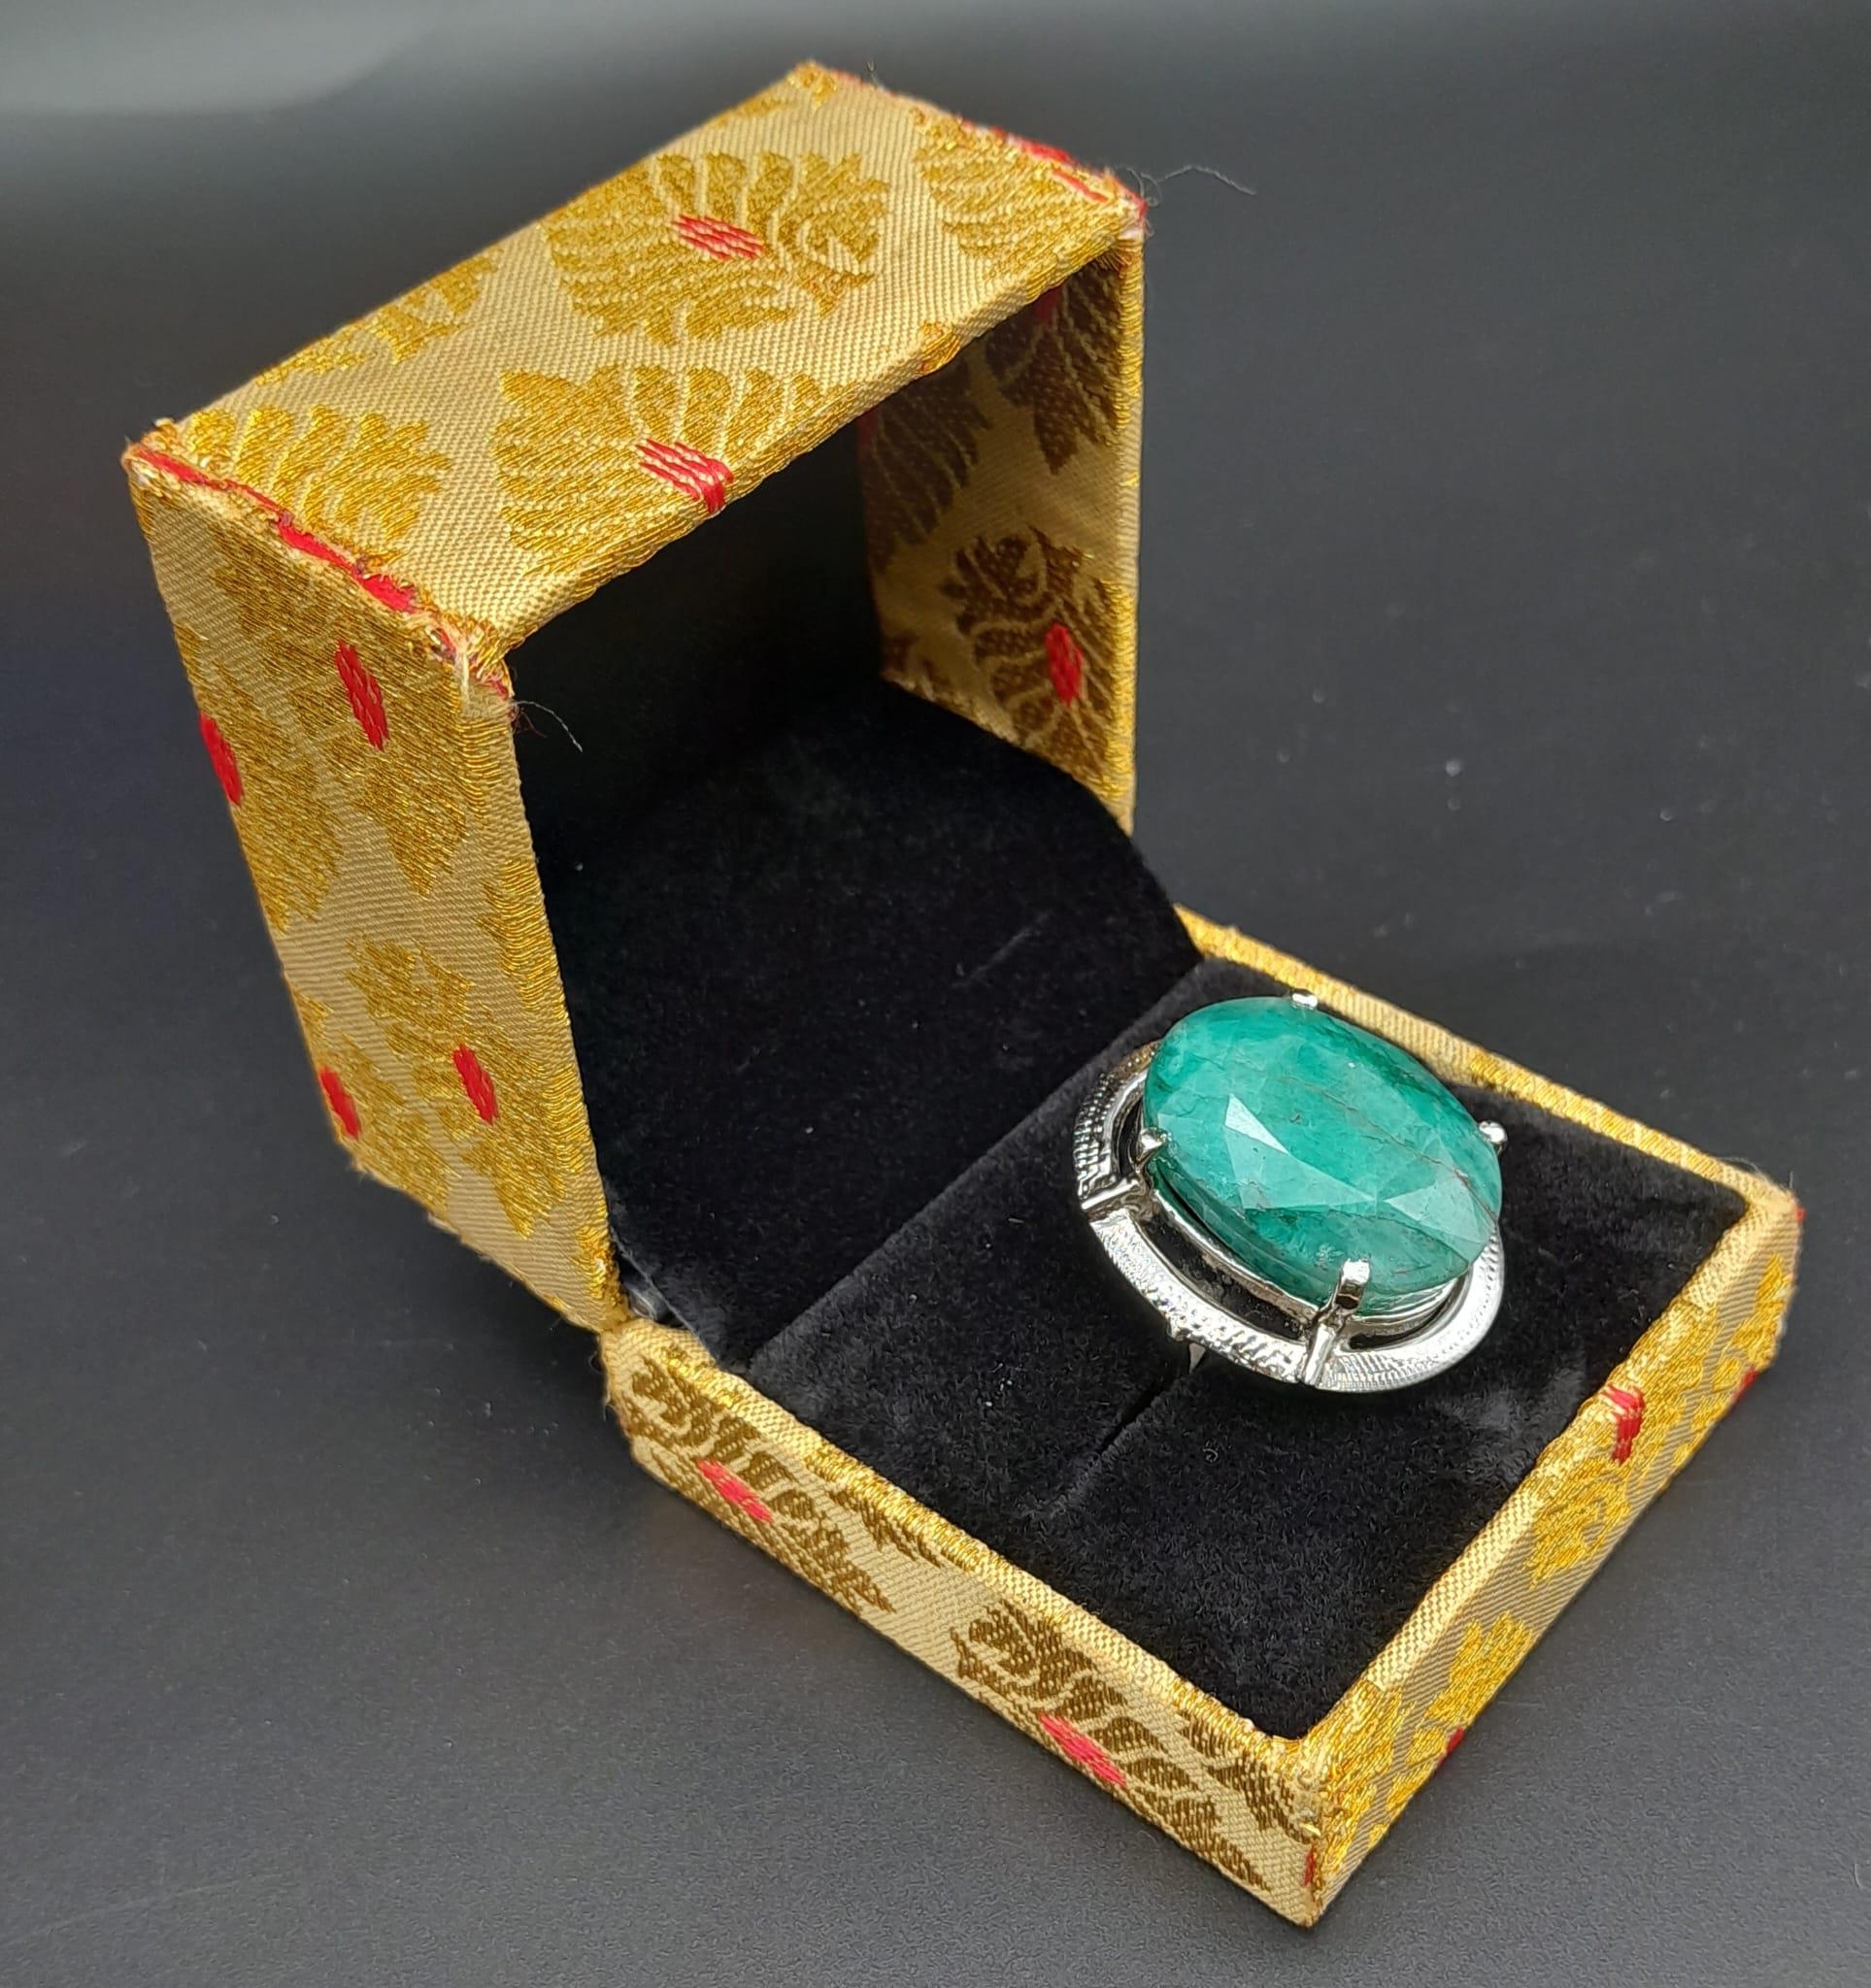 A 50ct Brazilian Oval Cut Emerald Ring. Set in 925 Sterling Silver. Size P. Comes with a - Image 6 of 7